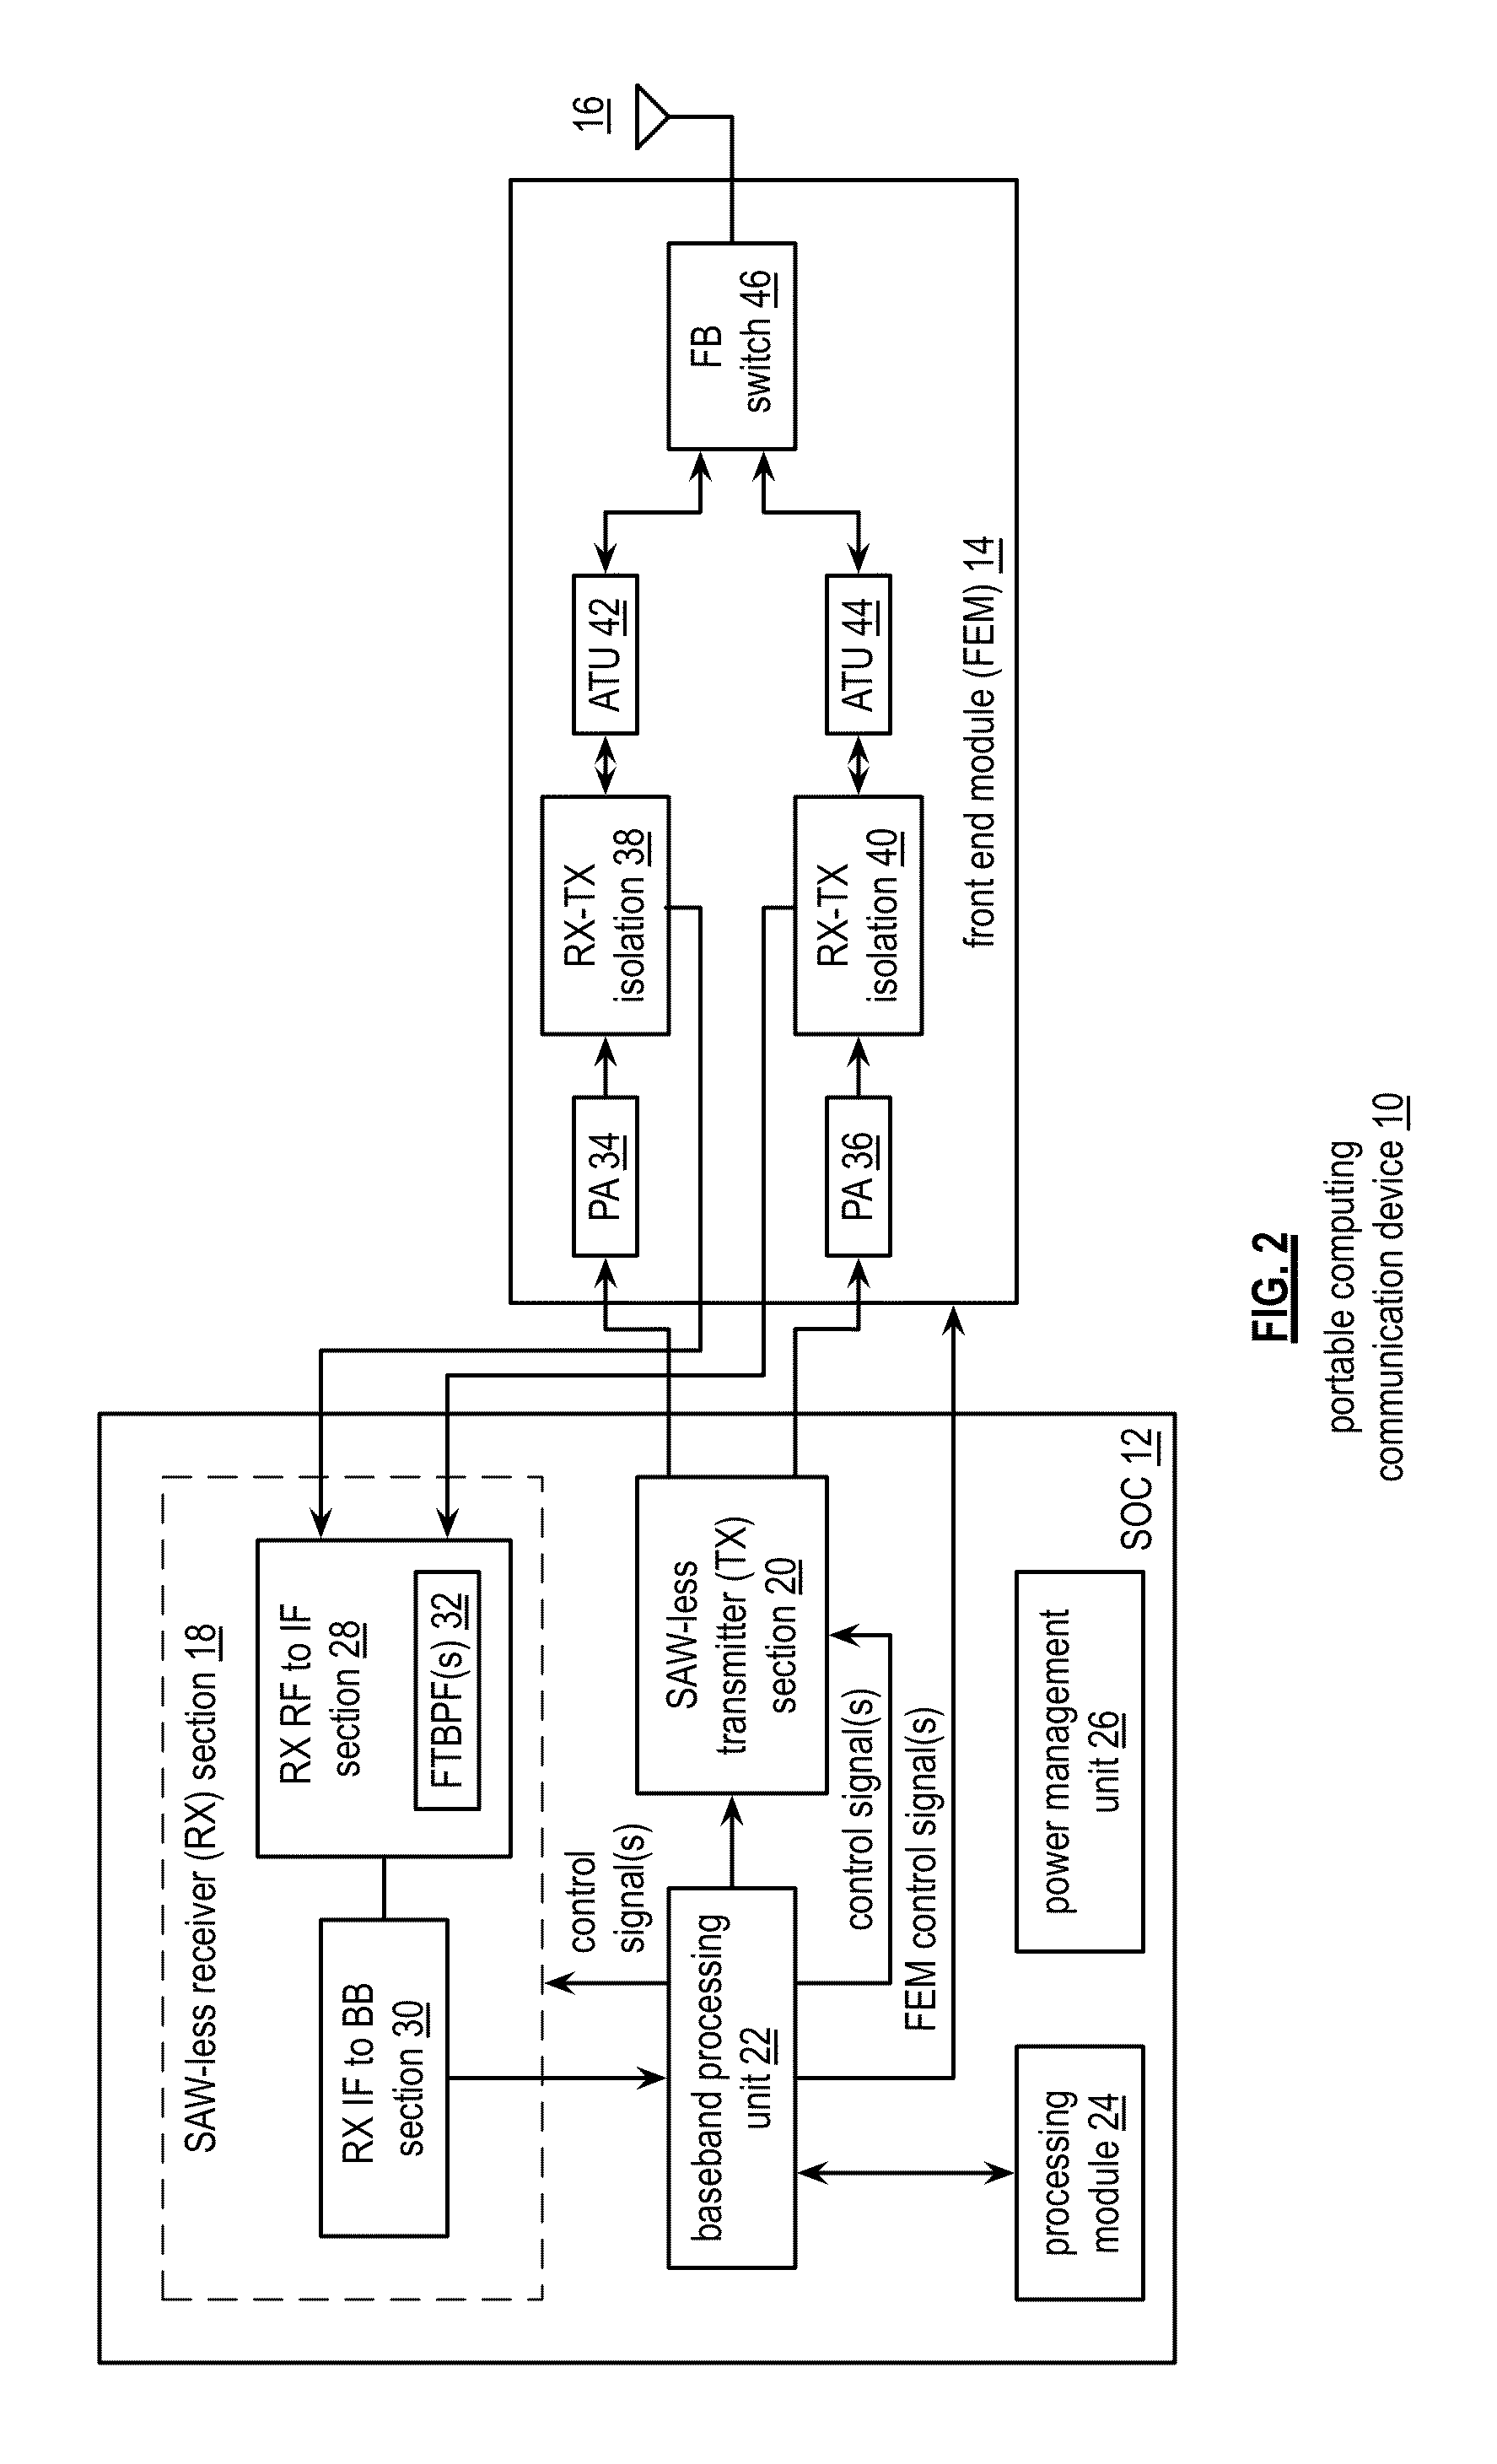 Multiple-phase frequency translated filter